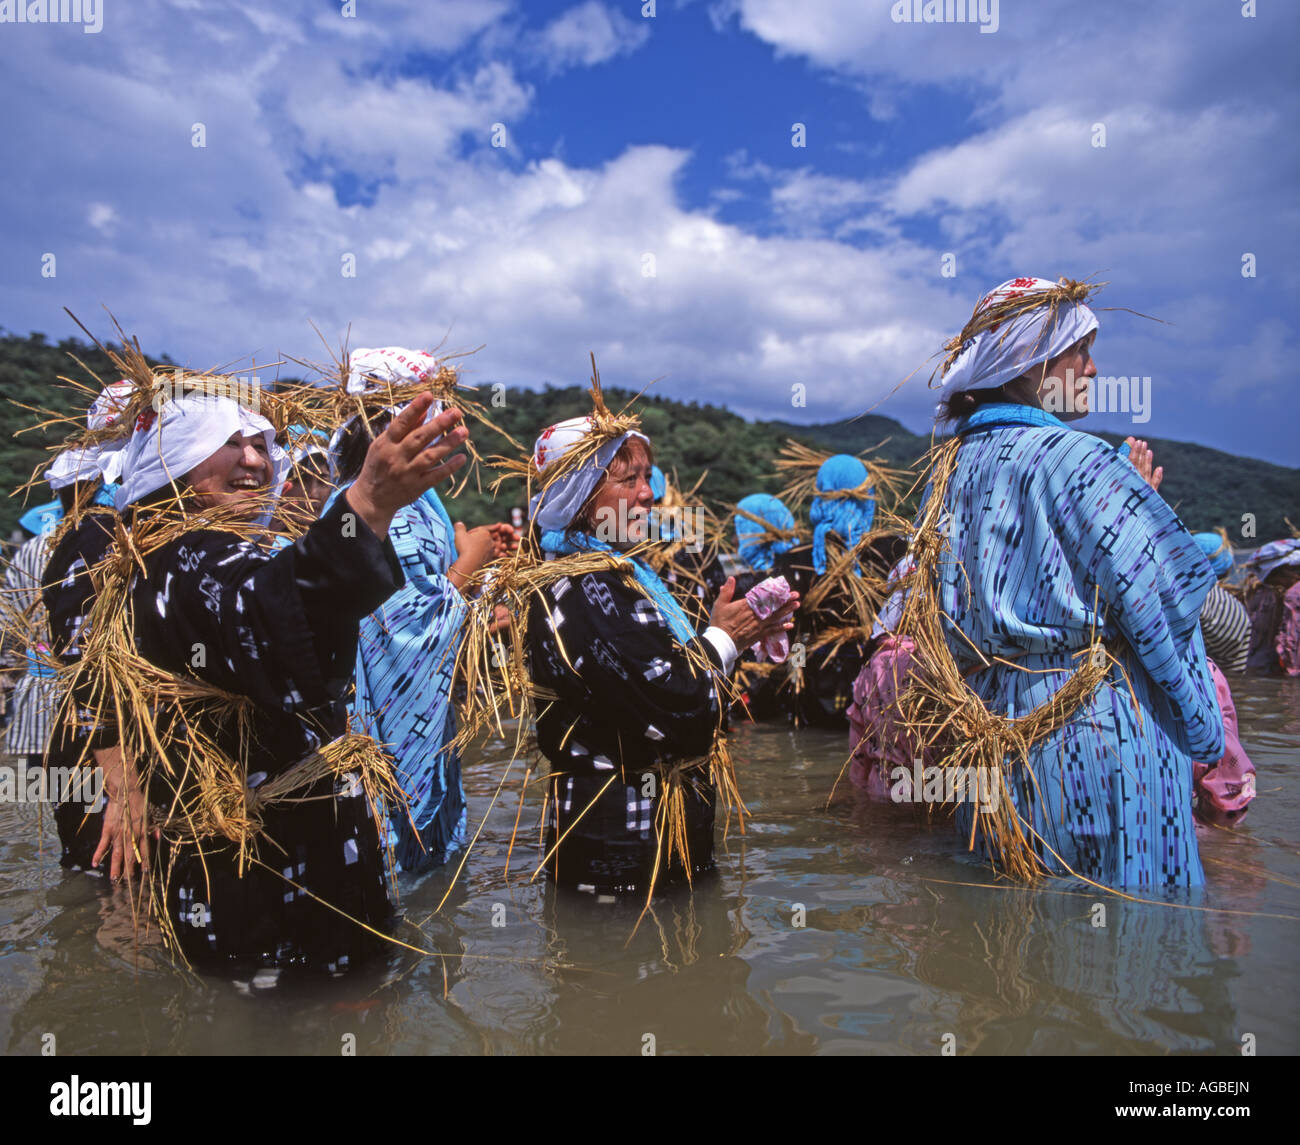 Shioya Ungami festival in Ogimi Village, Okinawa, Japan. Women stand in the ocean to welcome home the dragon boats. Stock Photo